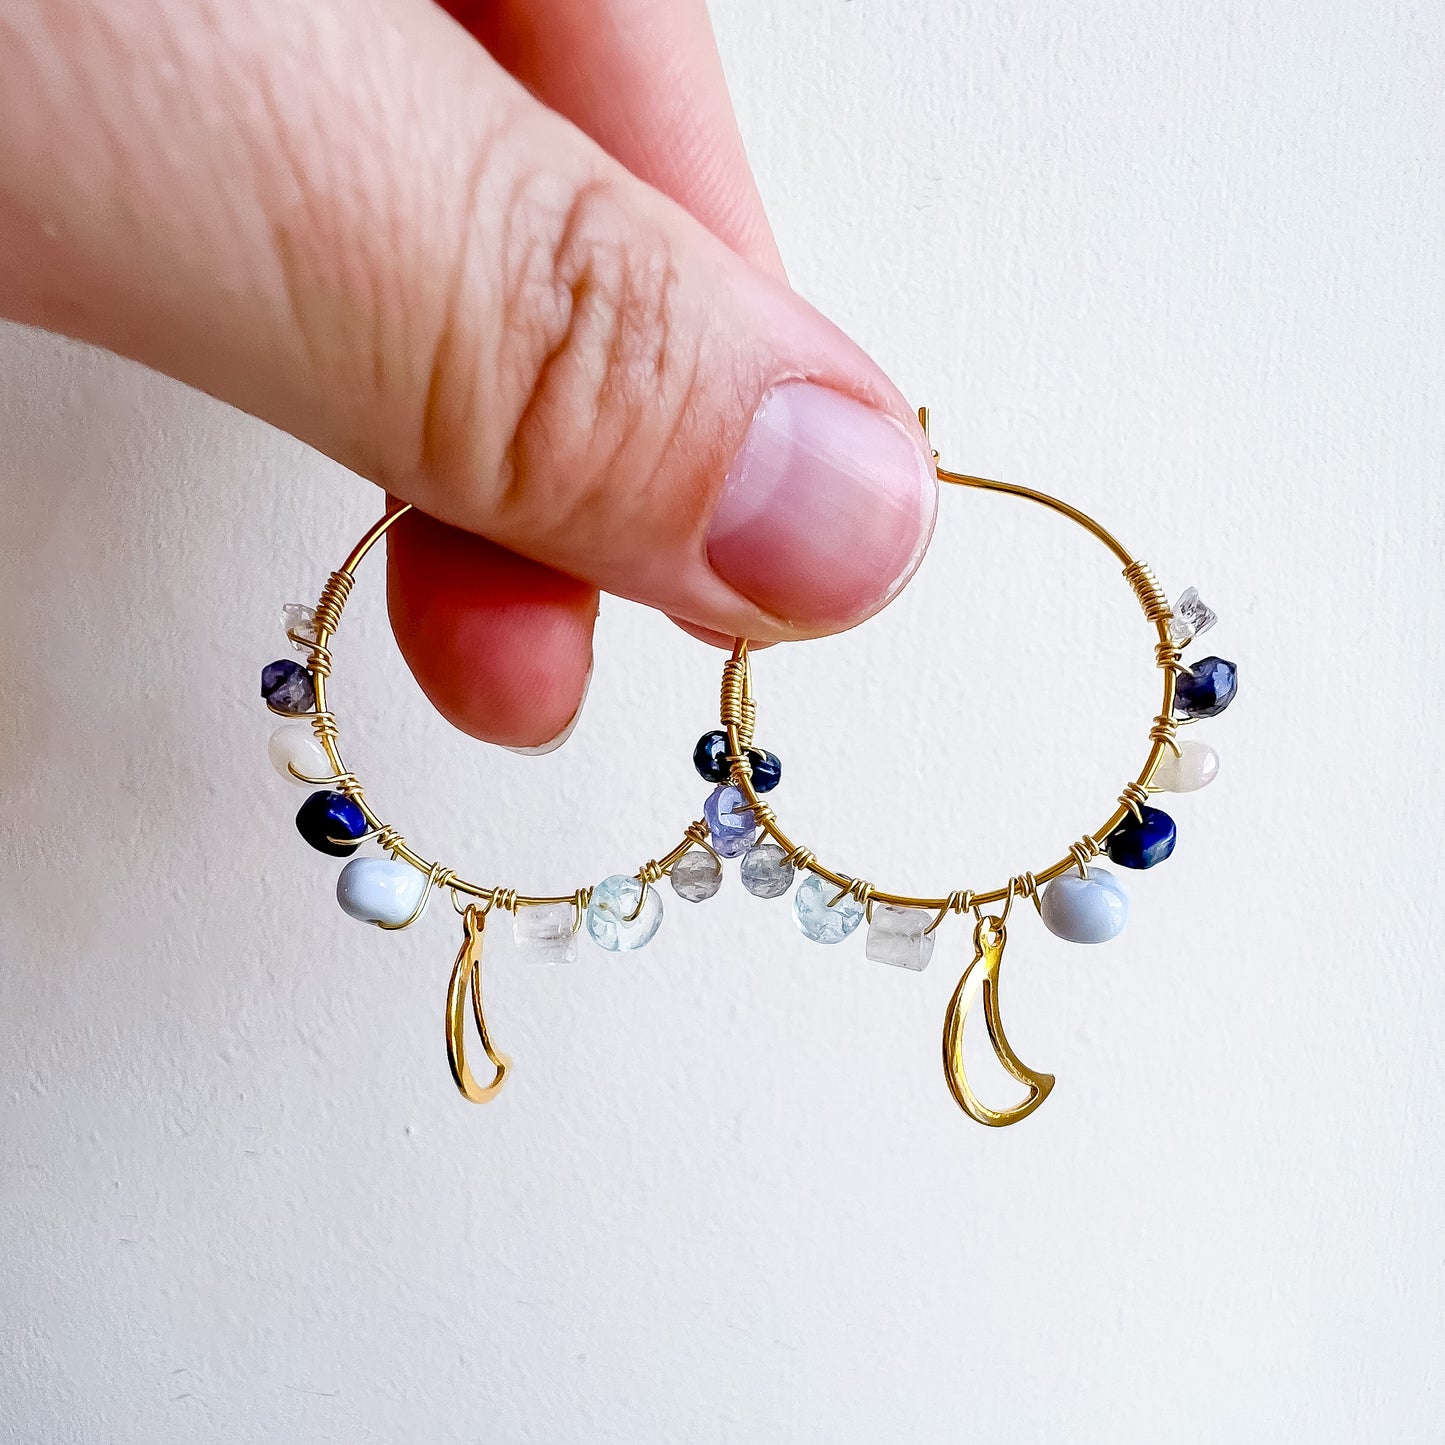 PRE-ORDERS - Gold colour - “Once in a blue moon” earrings